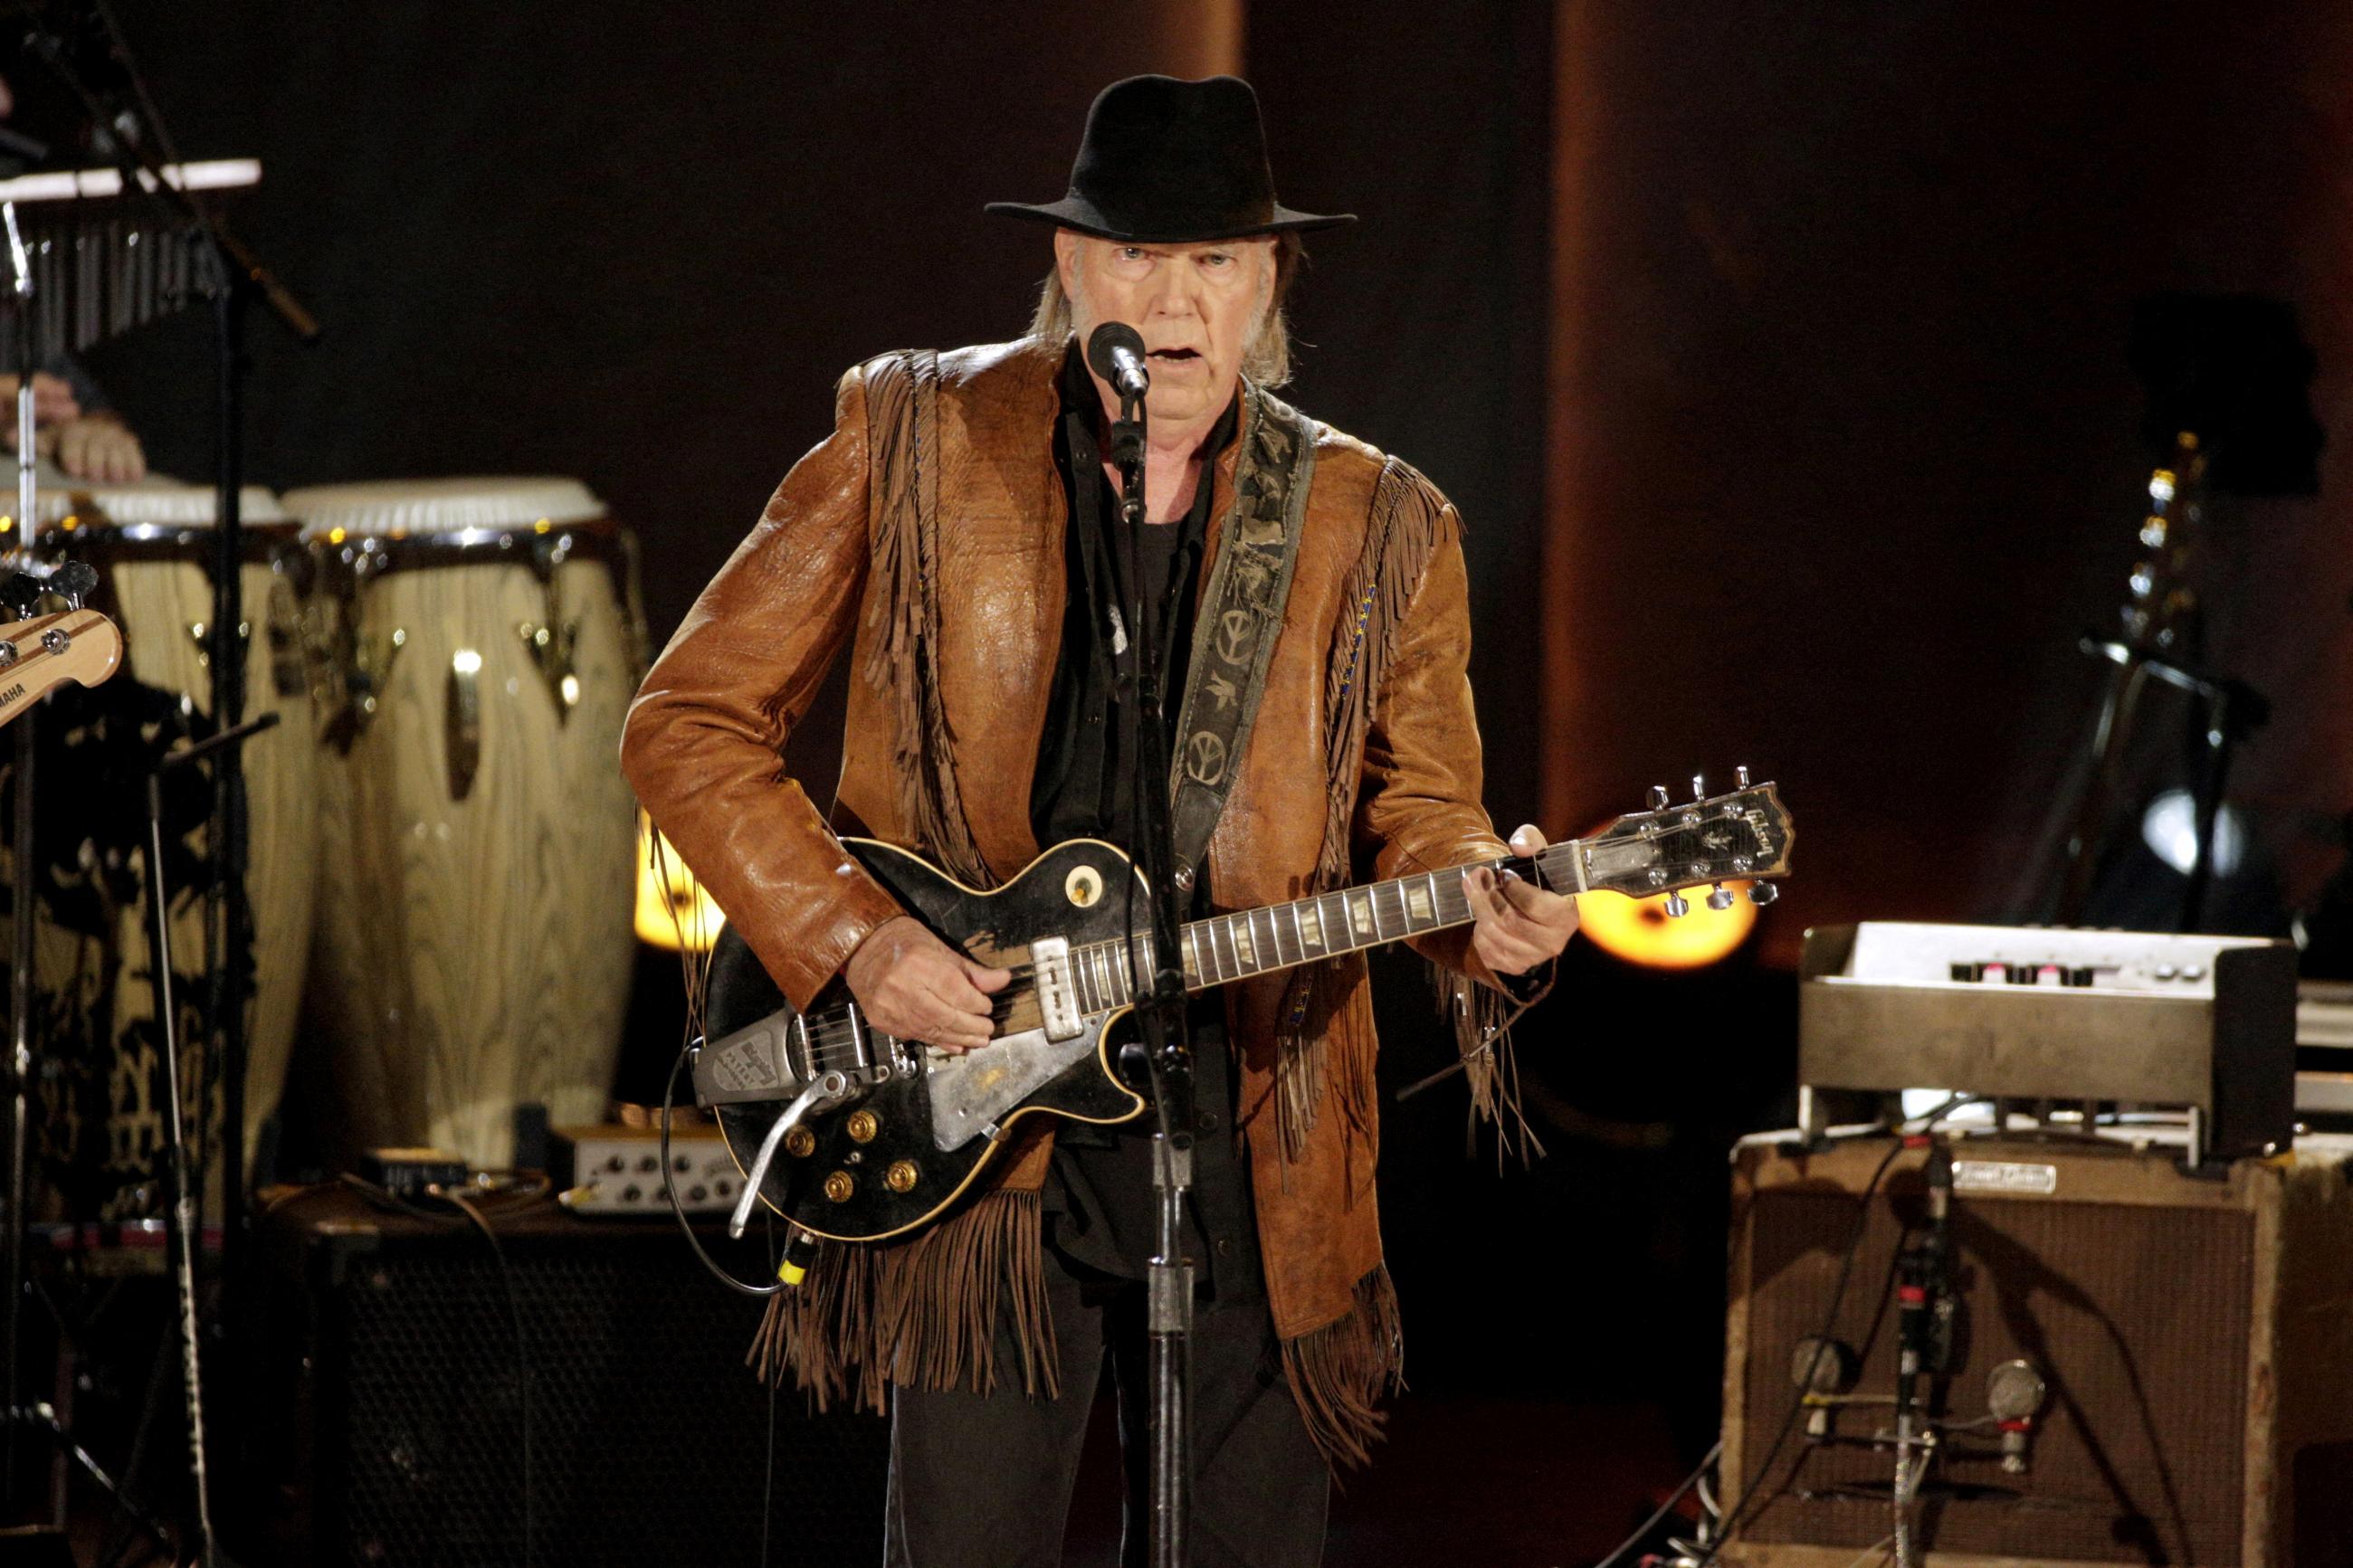 Singer-songwriter Neil Young performs on stage wearing a fringed jacket and black hat.